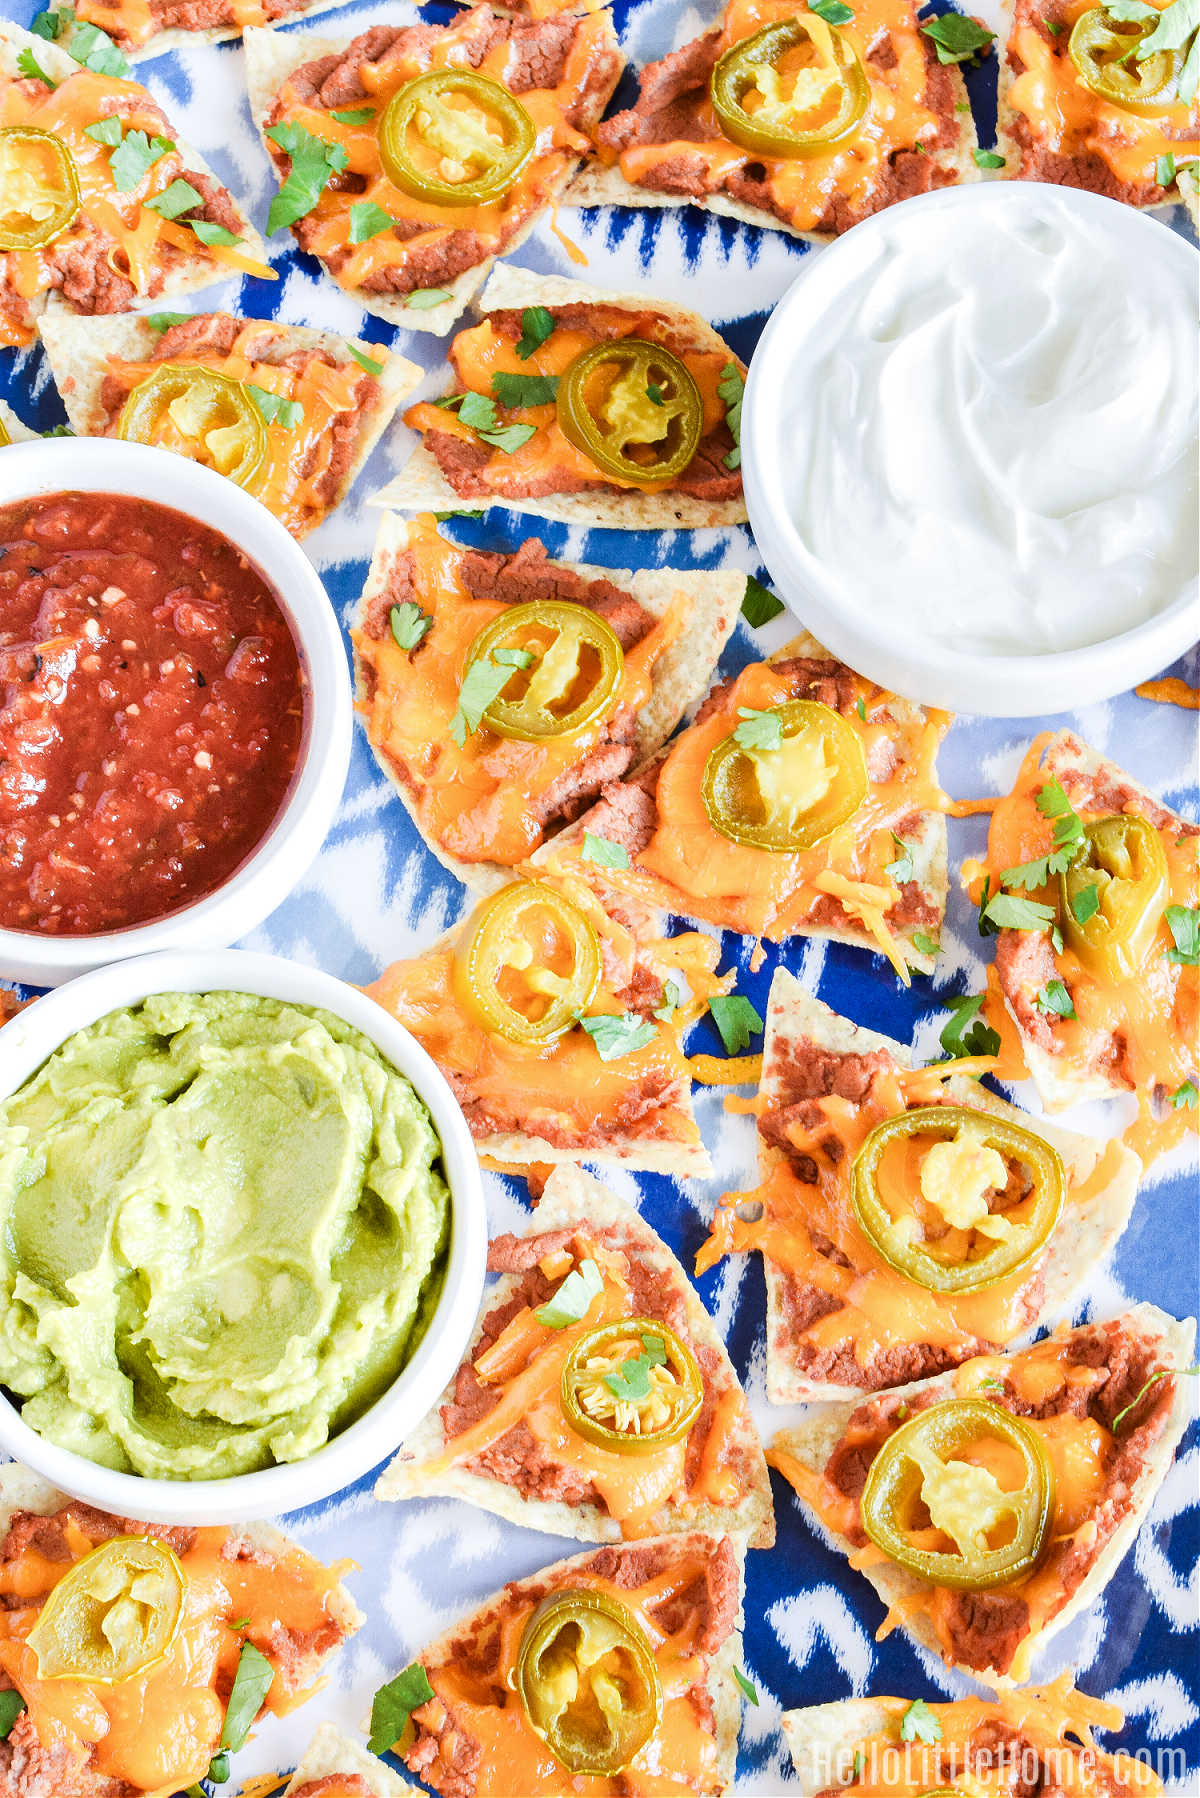 A large tray of the easy nachos recipe served alongside bowls of toppings.